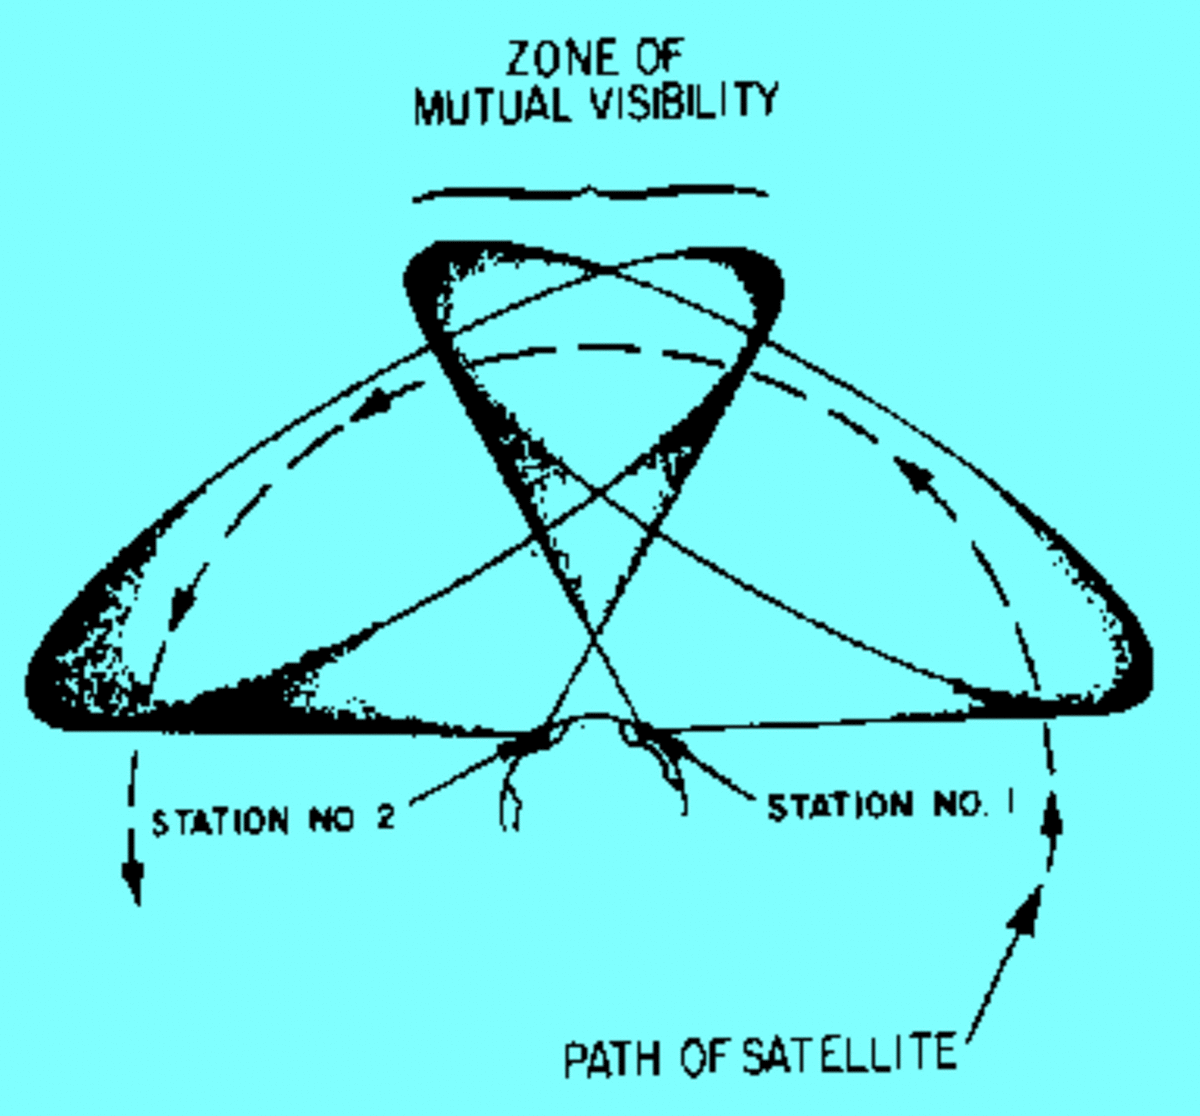 Zone Of Mutual Visibility and the Path of the Satellite Schema